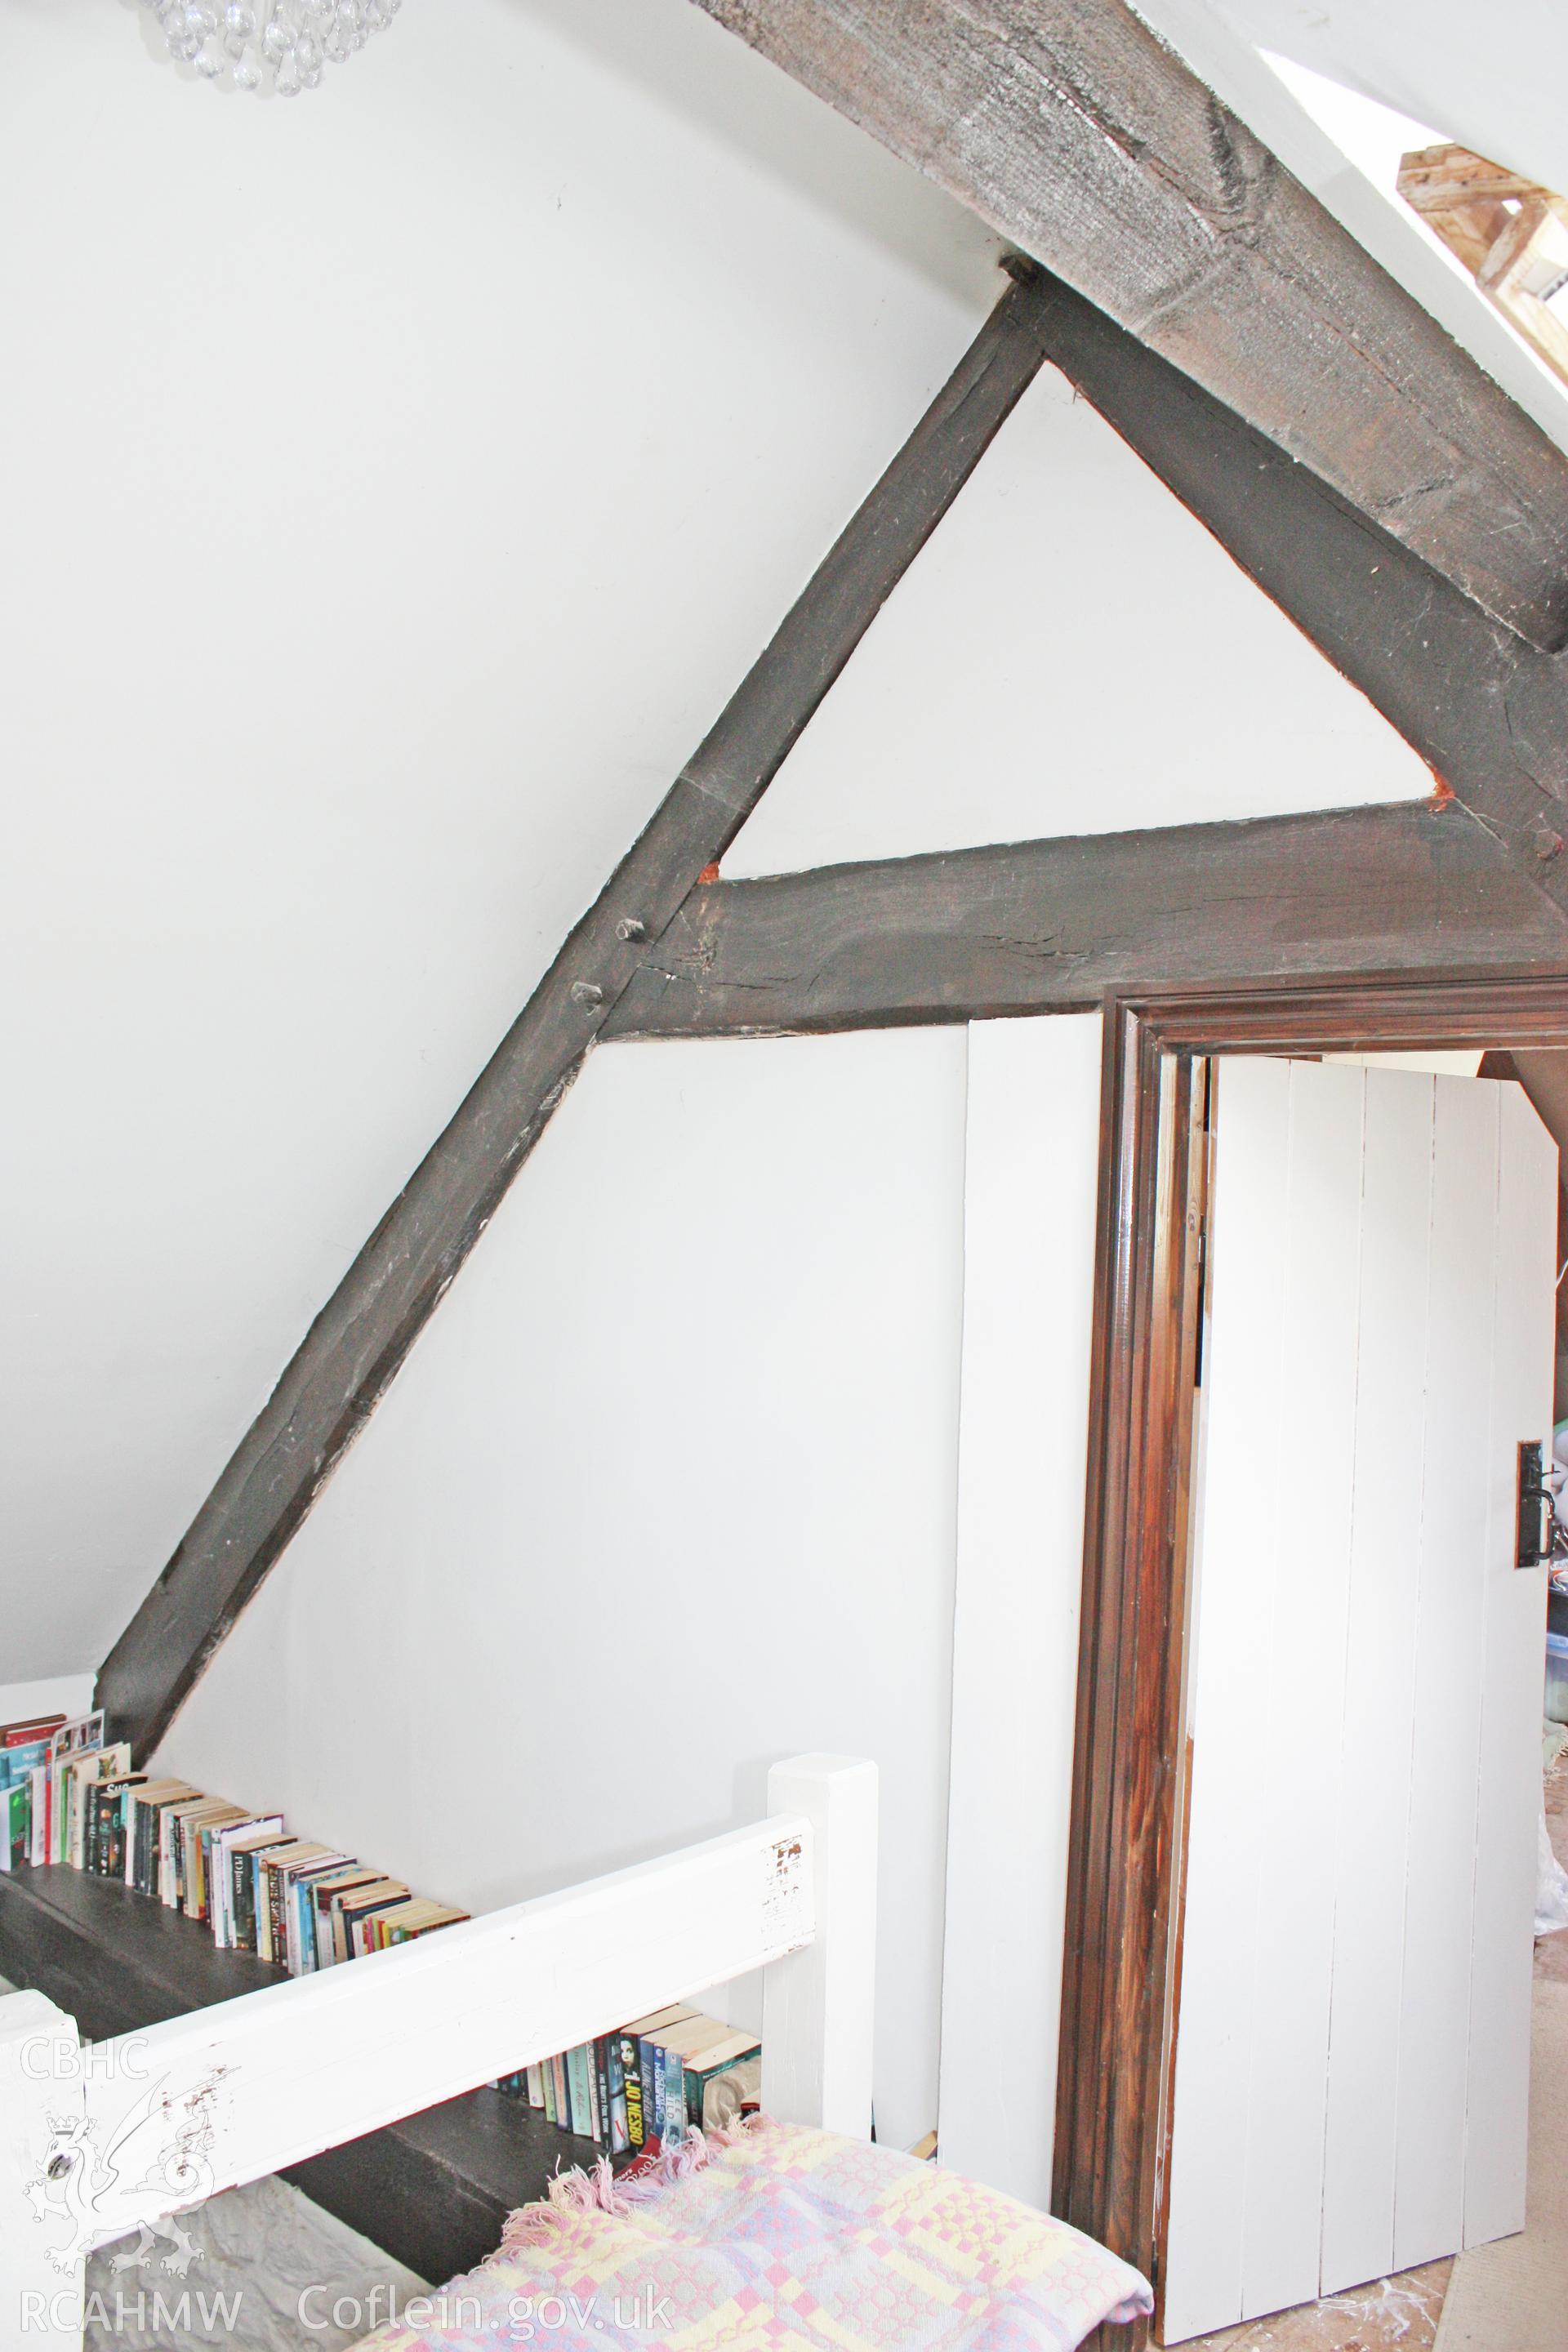 Glantywi House, interior view, roof-truss at stair-well.